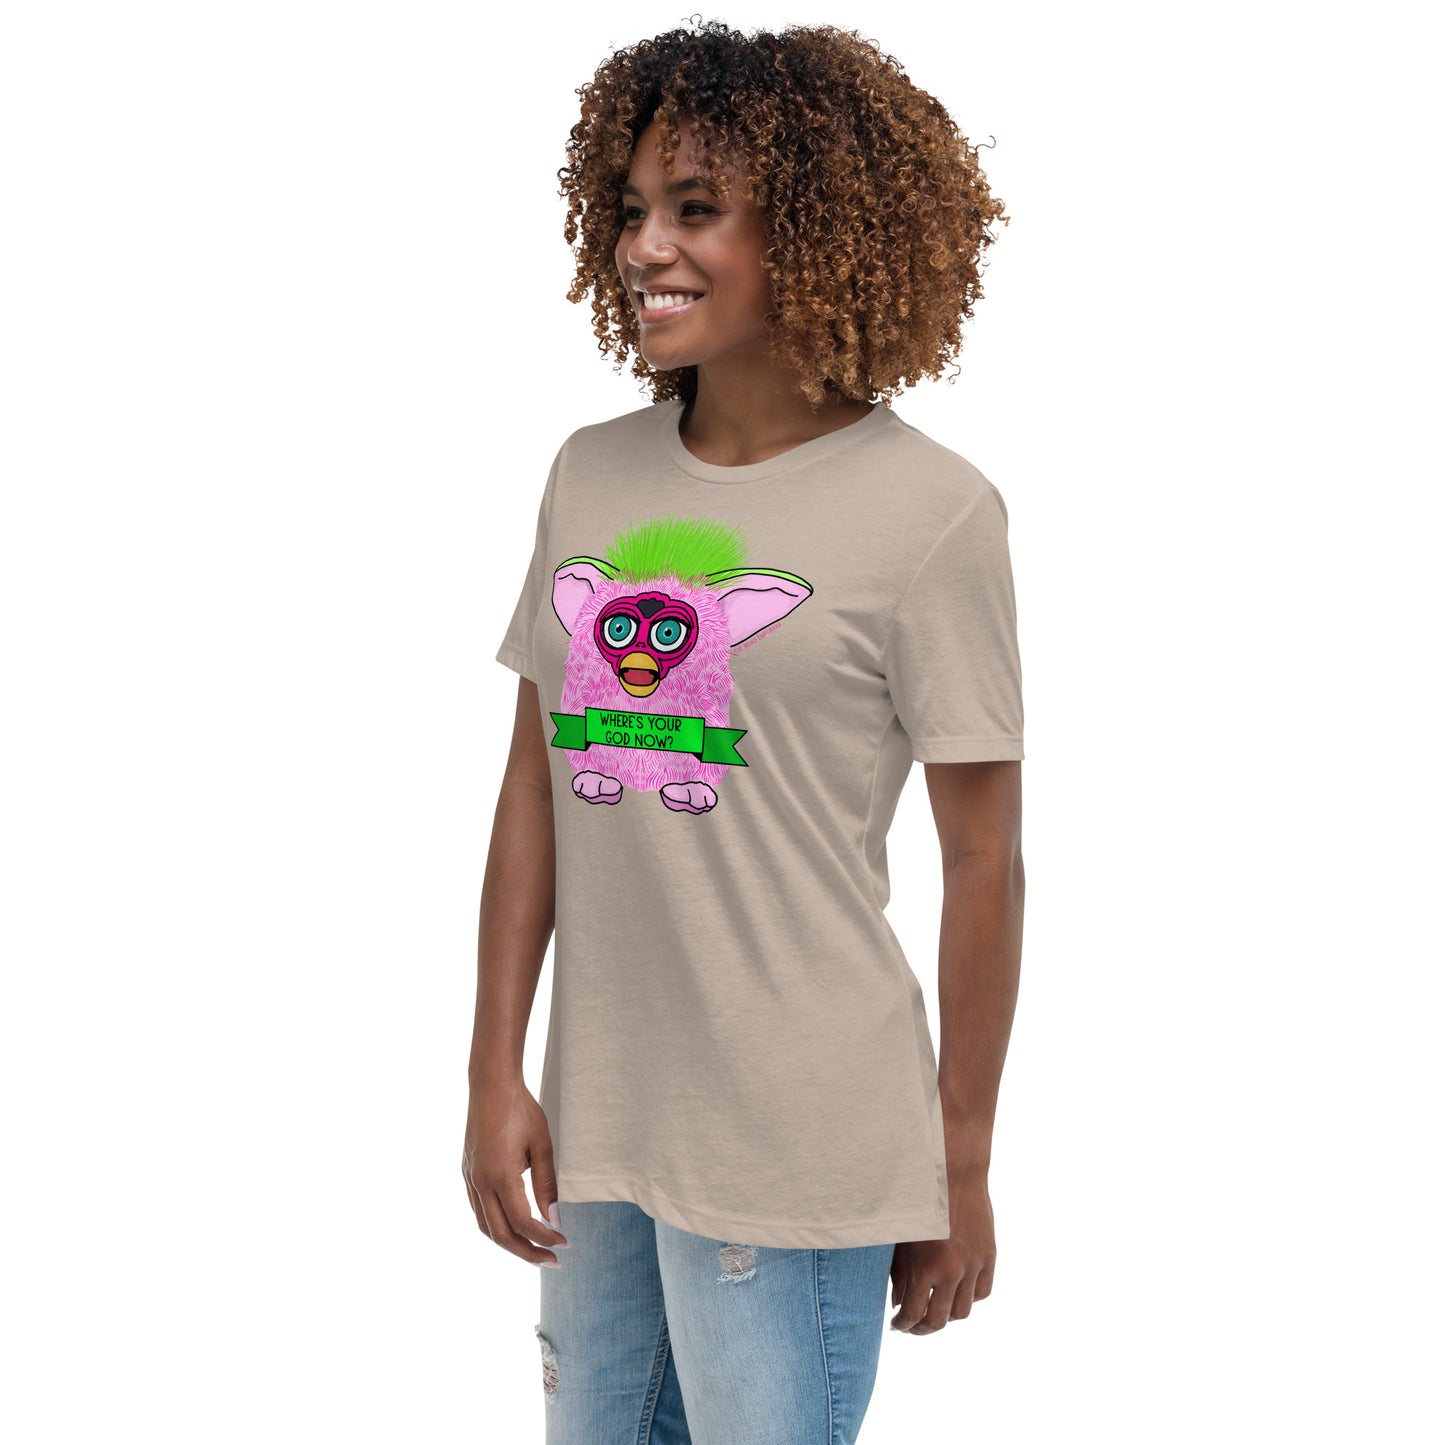 Furby - Where's Your God Now? Women's Relaxed T-Shirt